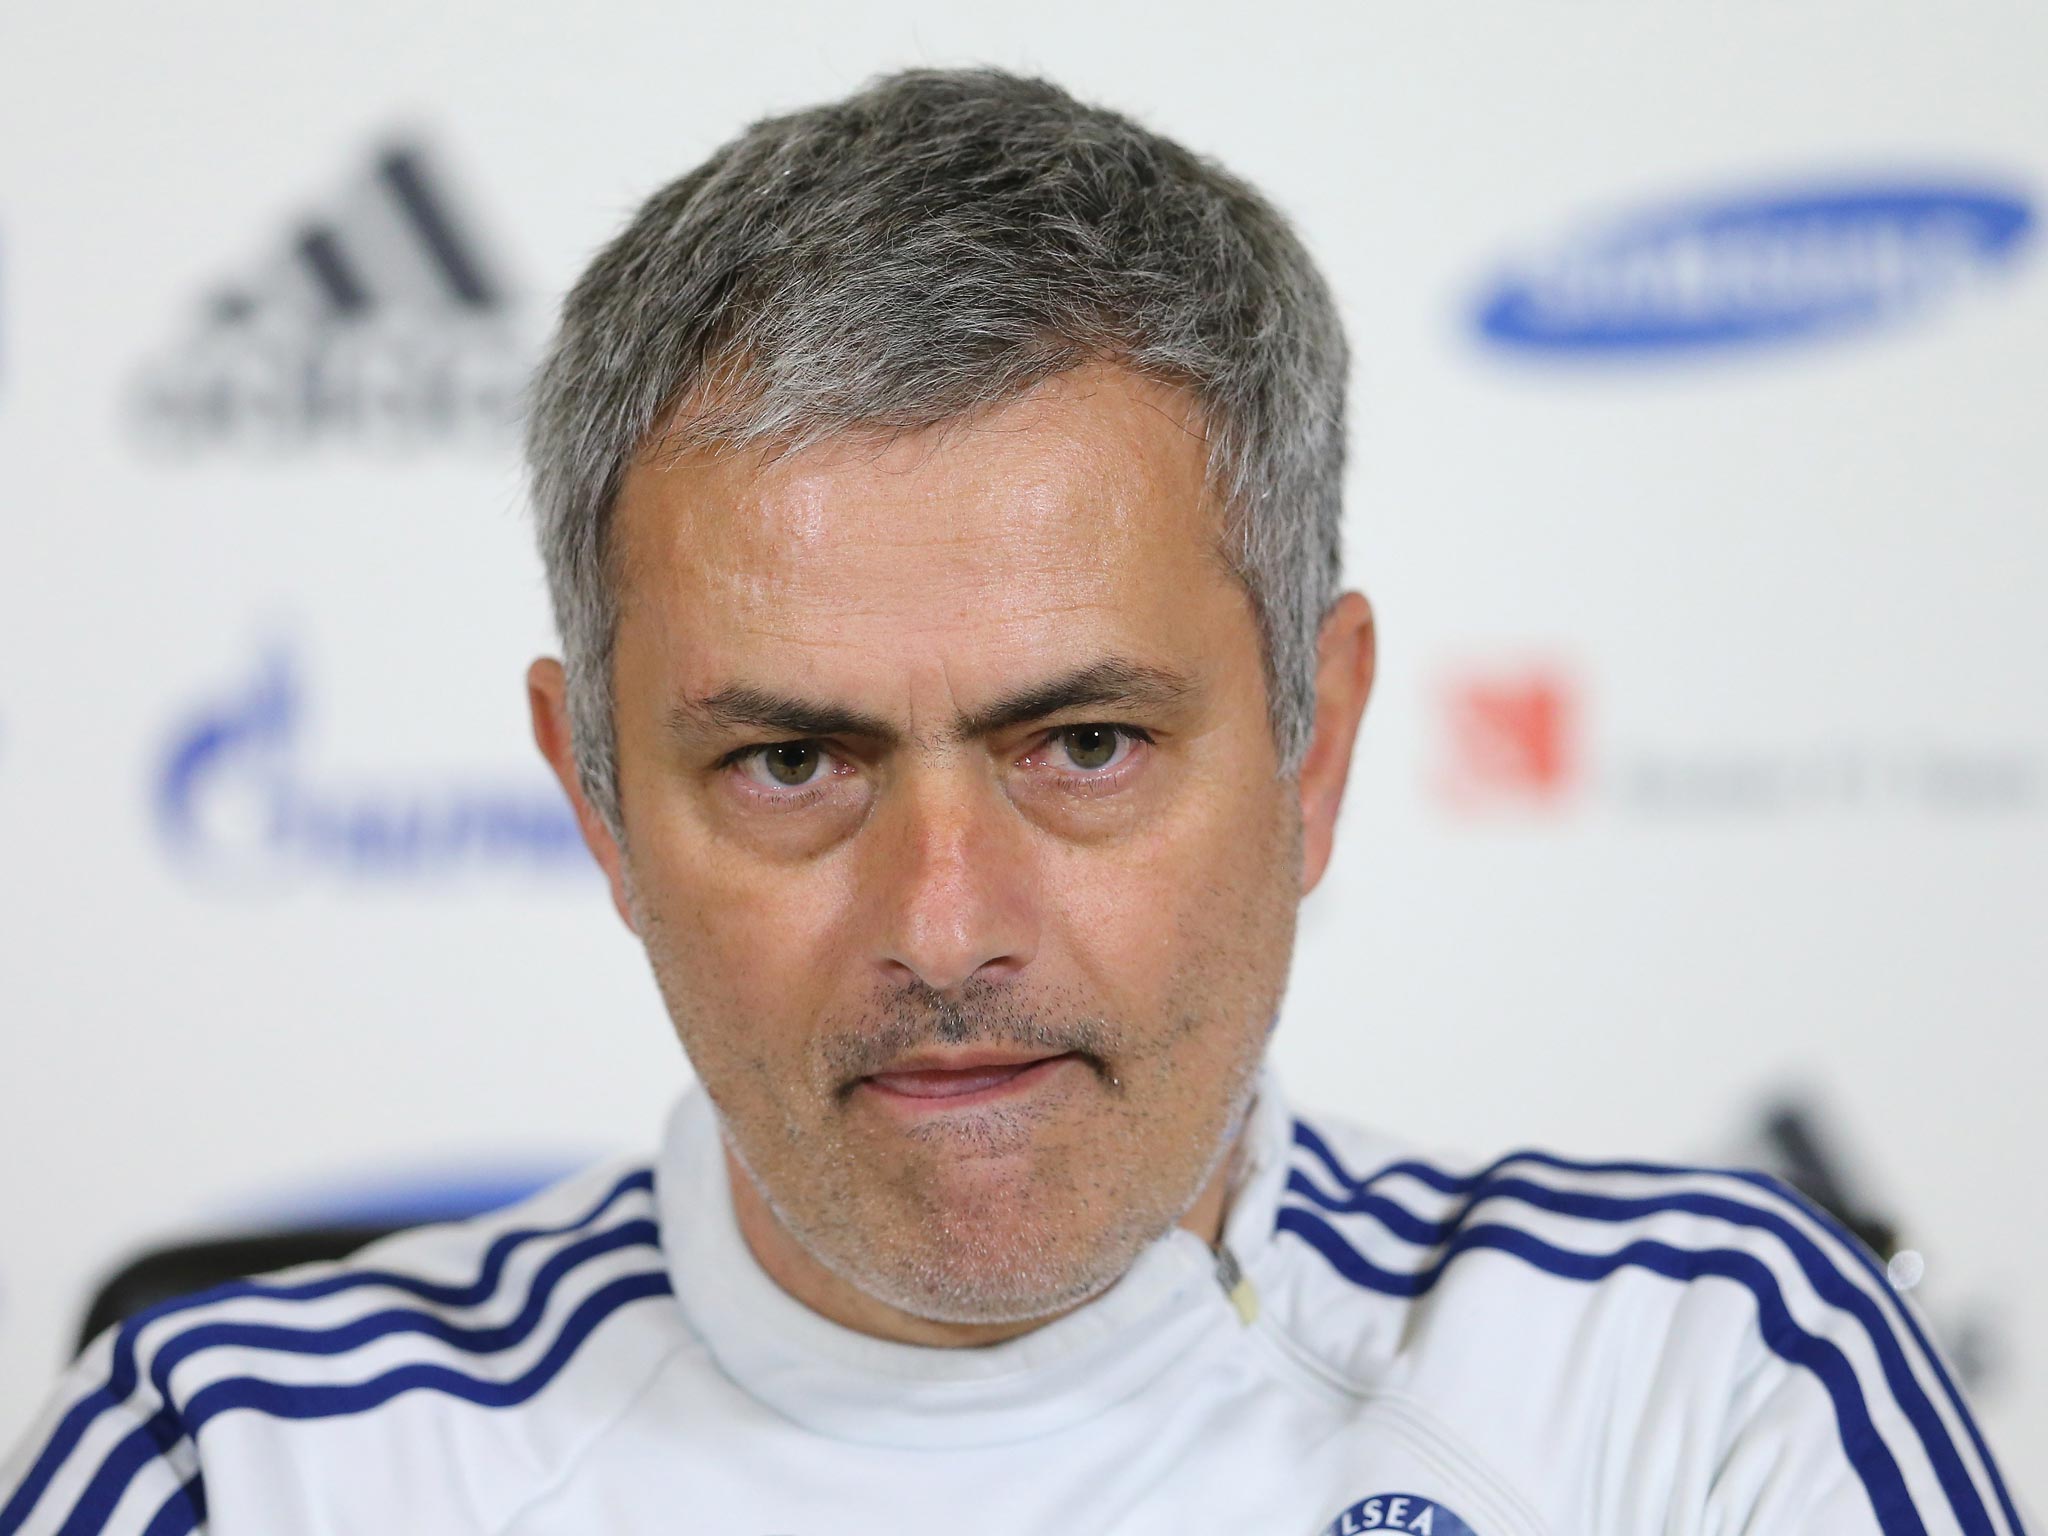 Jose Mourinho hit out at Manuel Pellegrini over his spending at Chelsea